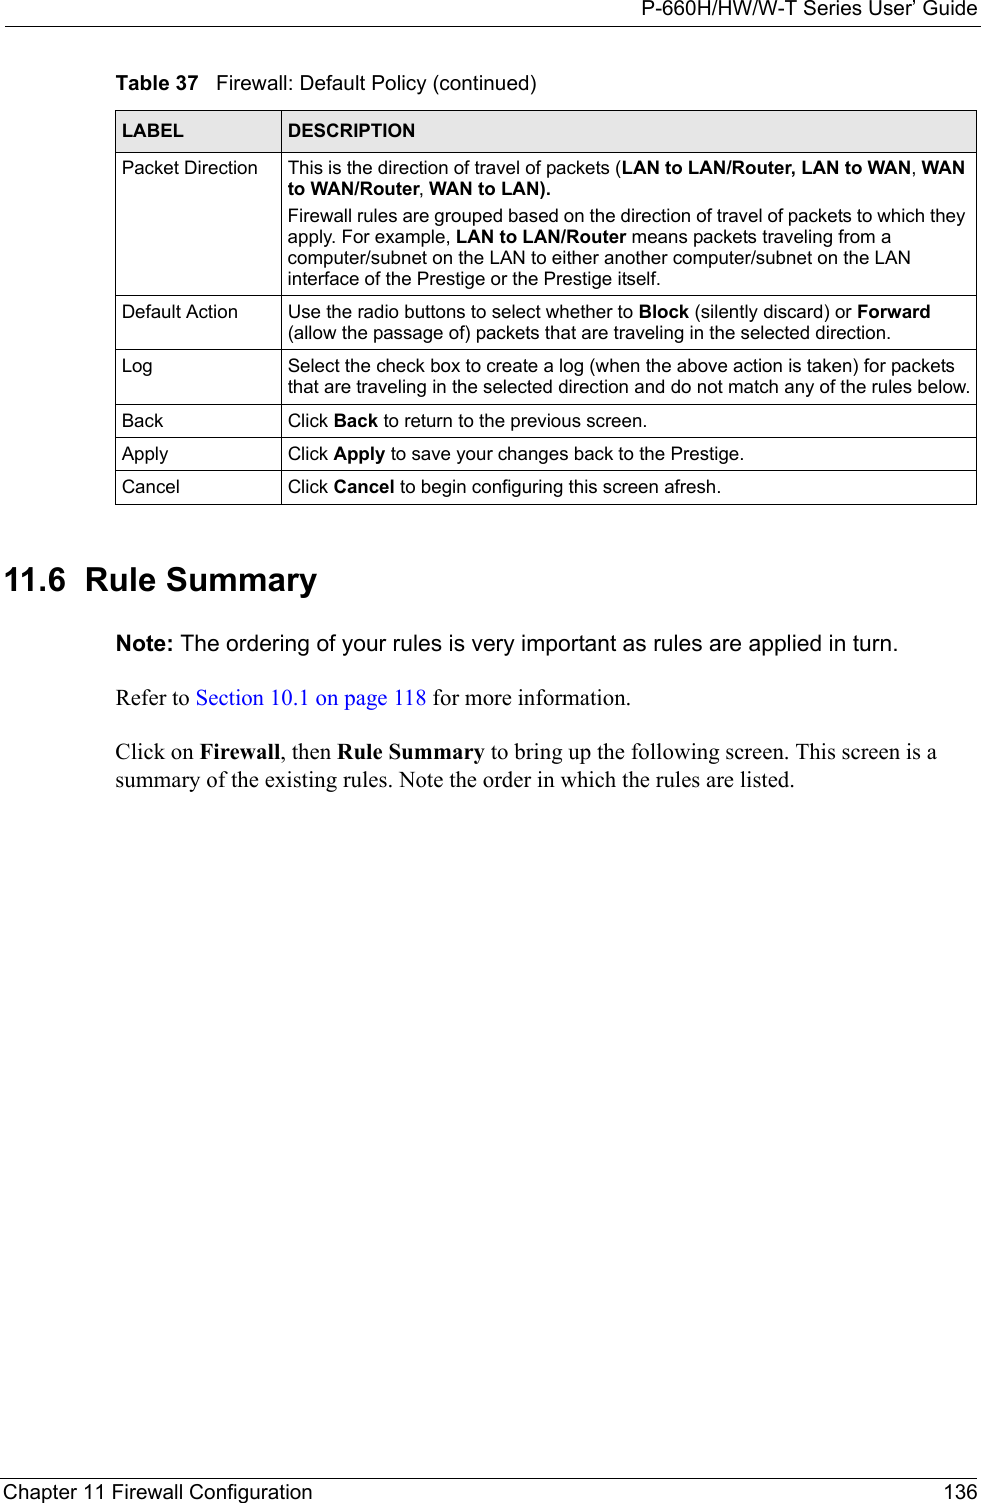 P-660H/HW/W-T Series User’ GuideChapter 11 Firewall Configuration 13611.6  Rule Summary  Note: The ordering of your rules is very important as rules are applied in turn.Refer to Section 10.1 on page 118 for more information. Click on Firewall, then Rule Summary to bring up the following screen. This screen is a summary of the existing rules. Note the order in which the rules are listed.Packet Direction This is the direction of travel of packets (LAN to LAN/Router, LAN to WAN, WAN to WAN/Router, WAN to LAN).Firewall rules are grouped based on the direction of travel of packets to which they apply. For example, LAN to LAN/Router means packets traveling from a computer/subnet on the LAN to either another computer/subnet on the LAN interface of the Prestige or the Prestige itself. Default Action Use the radio buttons to select whether to Block (silently discard) or Forward (allow the passage of) packets that are traveling in the selected direction.Log Select the check box to create a log (when the above action is taken) for packets that are traveling in the selected direction and do not match any of the rules below.Back Click Back to return to the previous screen. Apply Click Apply to save your changes back to the Prestige.Cancel Click Cancel to begin configuring this screen afresh.Table 37   Firewall: Default Policy (continued)LABEL DESCRIPTION